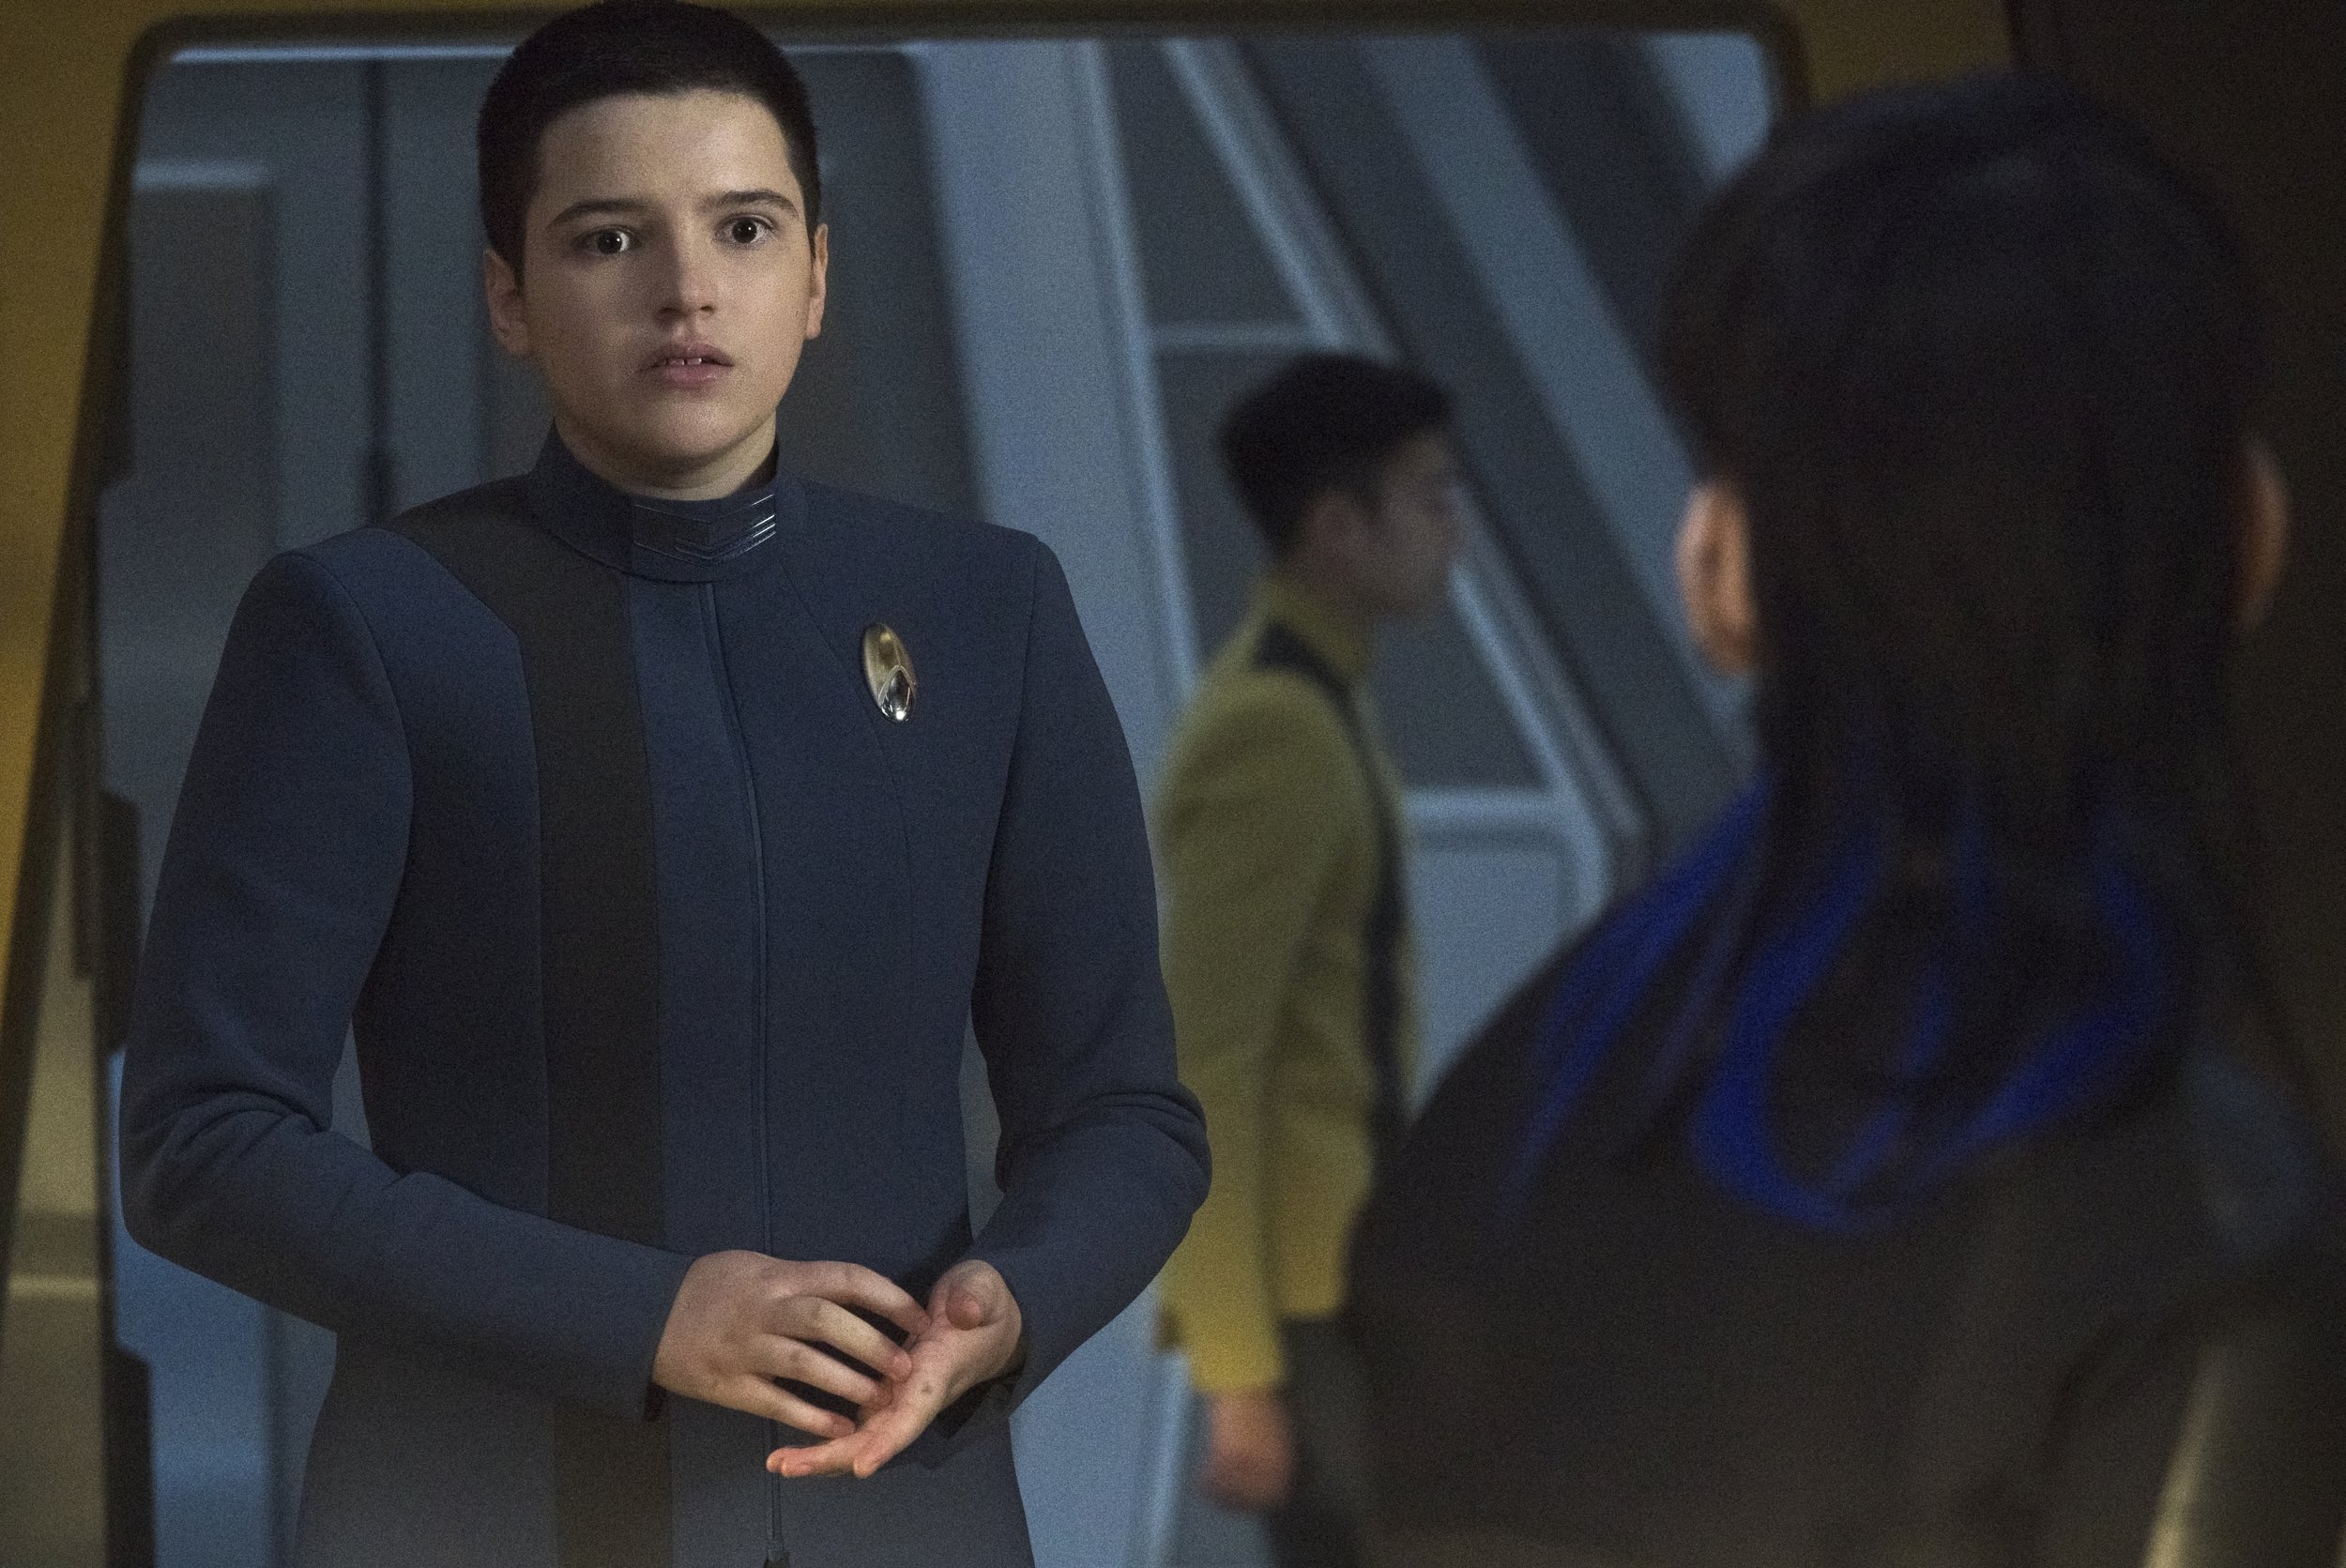   Pictured: Blu del Barrio as Adira and Ian Alexander as Gray of the Paramount+ original series STAR TREK: DISCOVERY. Photo Cr: Michael Gibson/Paramount+ (C) 2021 CBS Interactive. All Rights Reserved.  